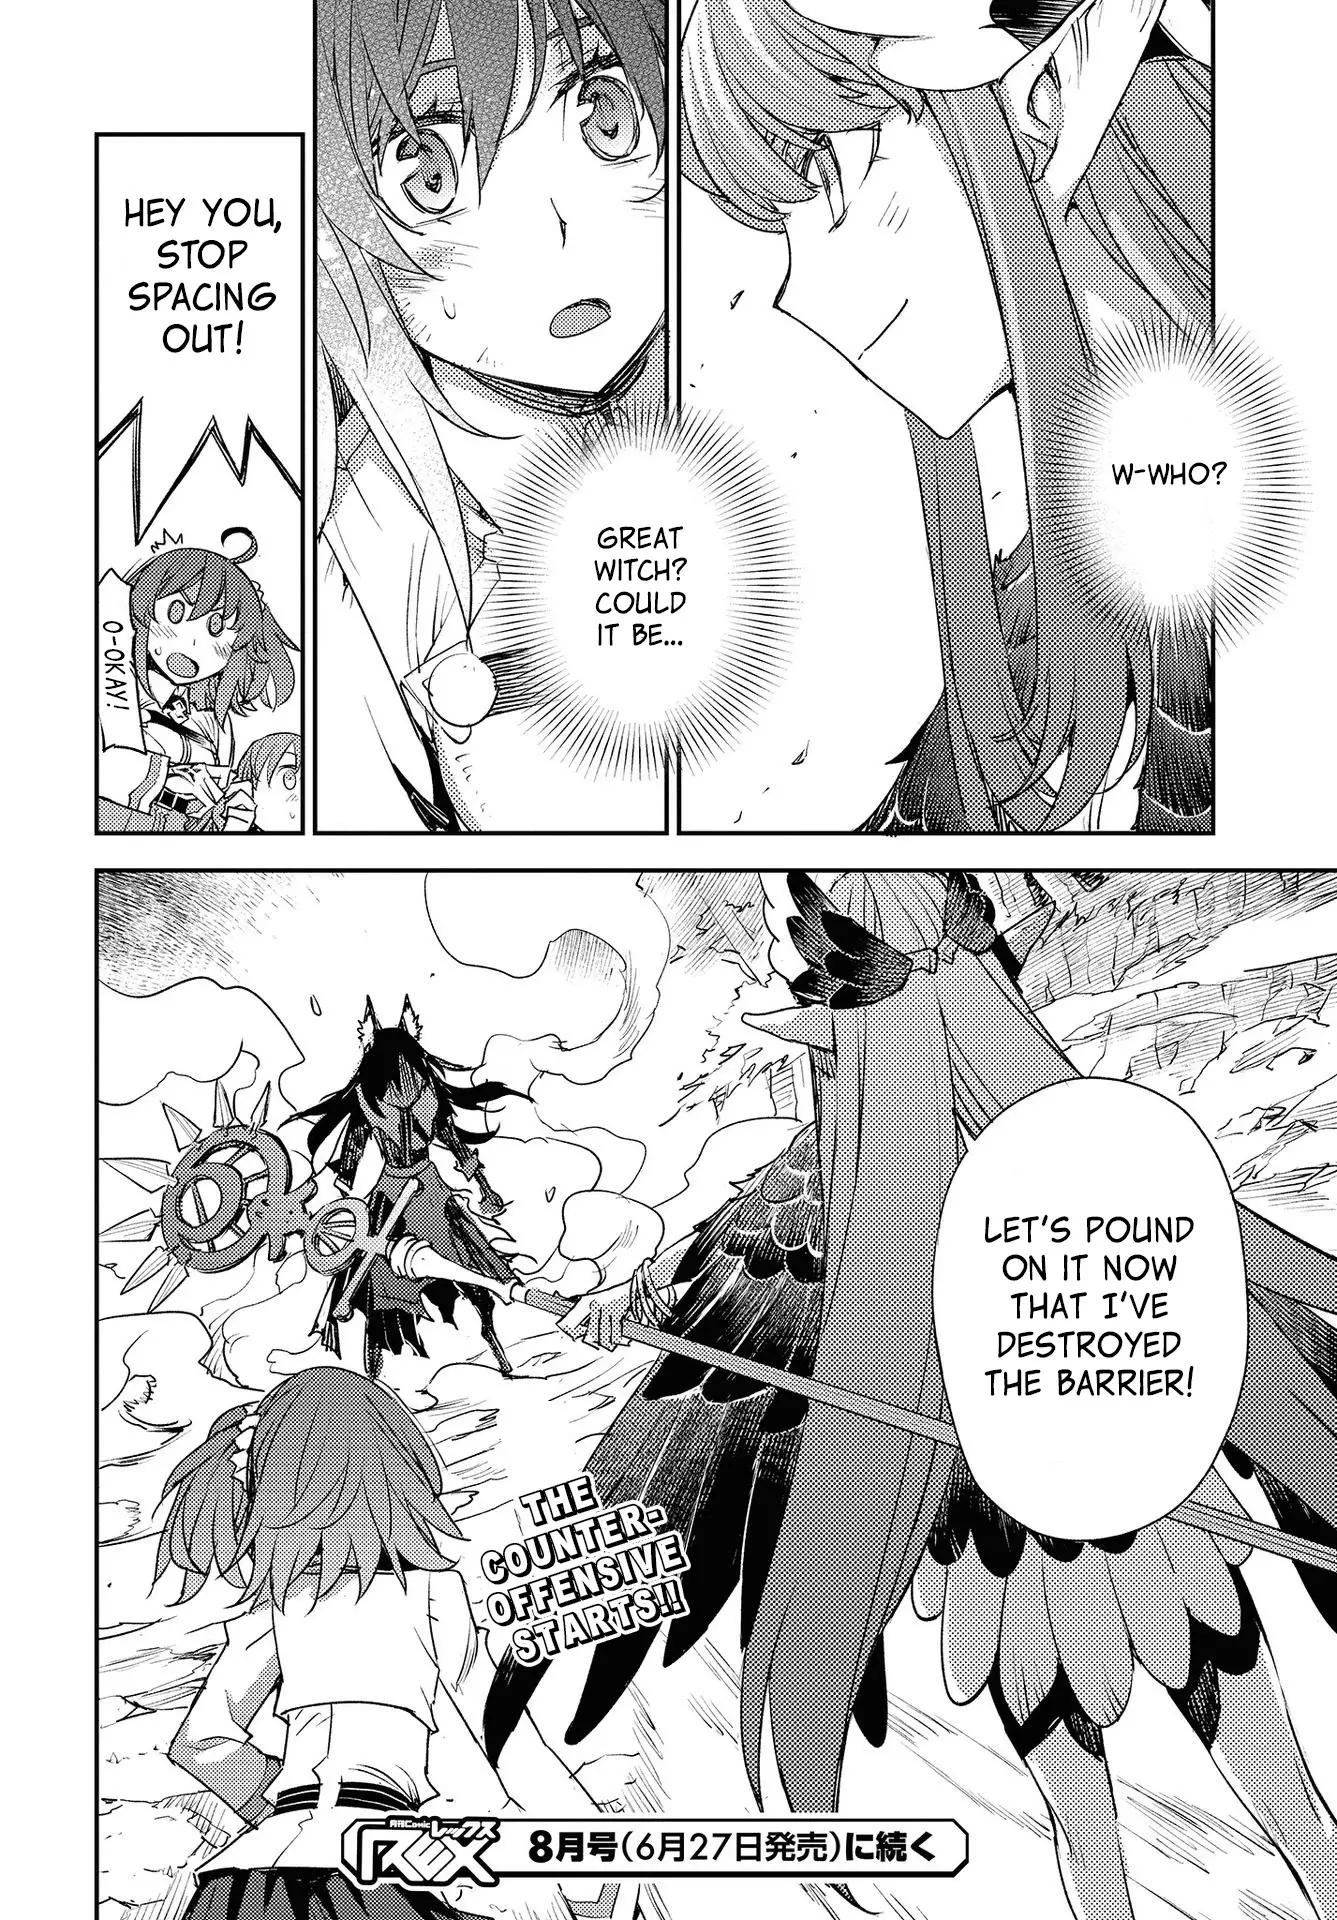 Fate/grand Order: Epic Of Remnant - Subspecies Singularity Iv: Taboo Advent Salem: Salem Of Heresy - 17 page 16